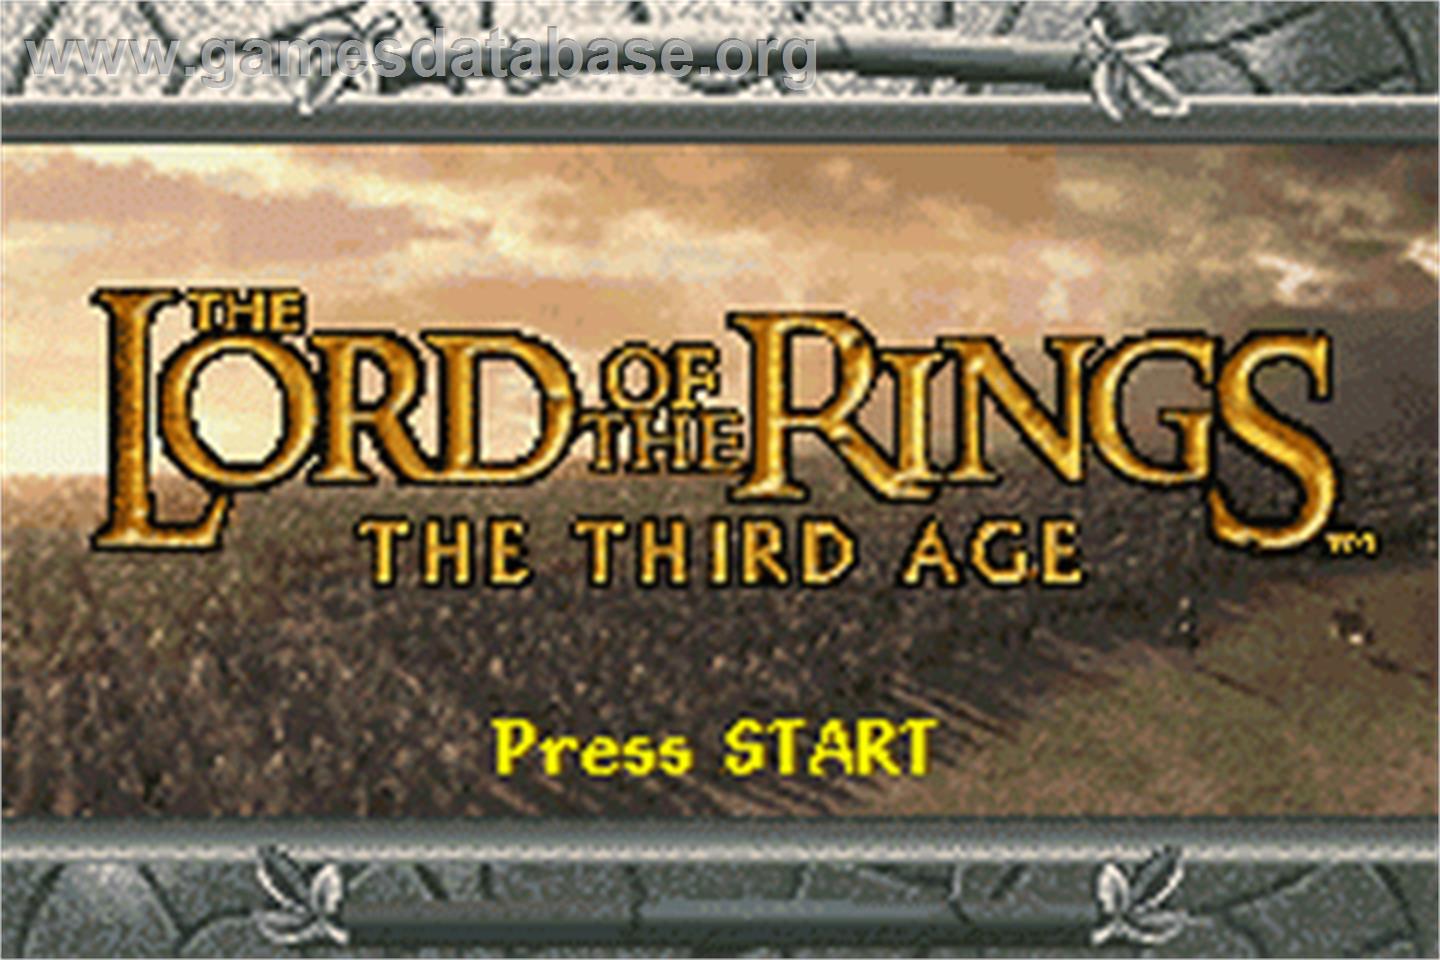 Weiland trechter Faeröer Lord of the Rings: The Third Age - Nintendo Game Boy Advance - Artwork -  Title Screen